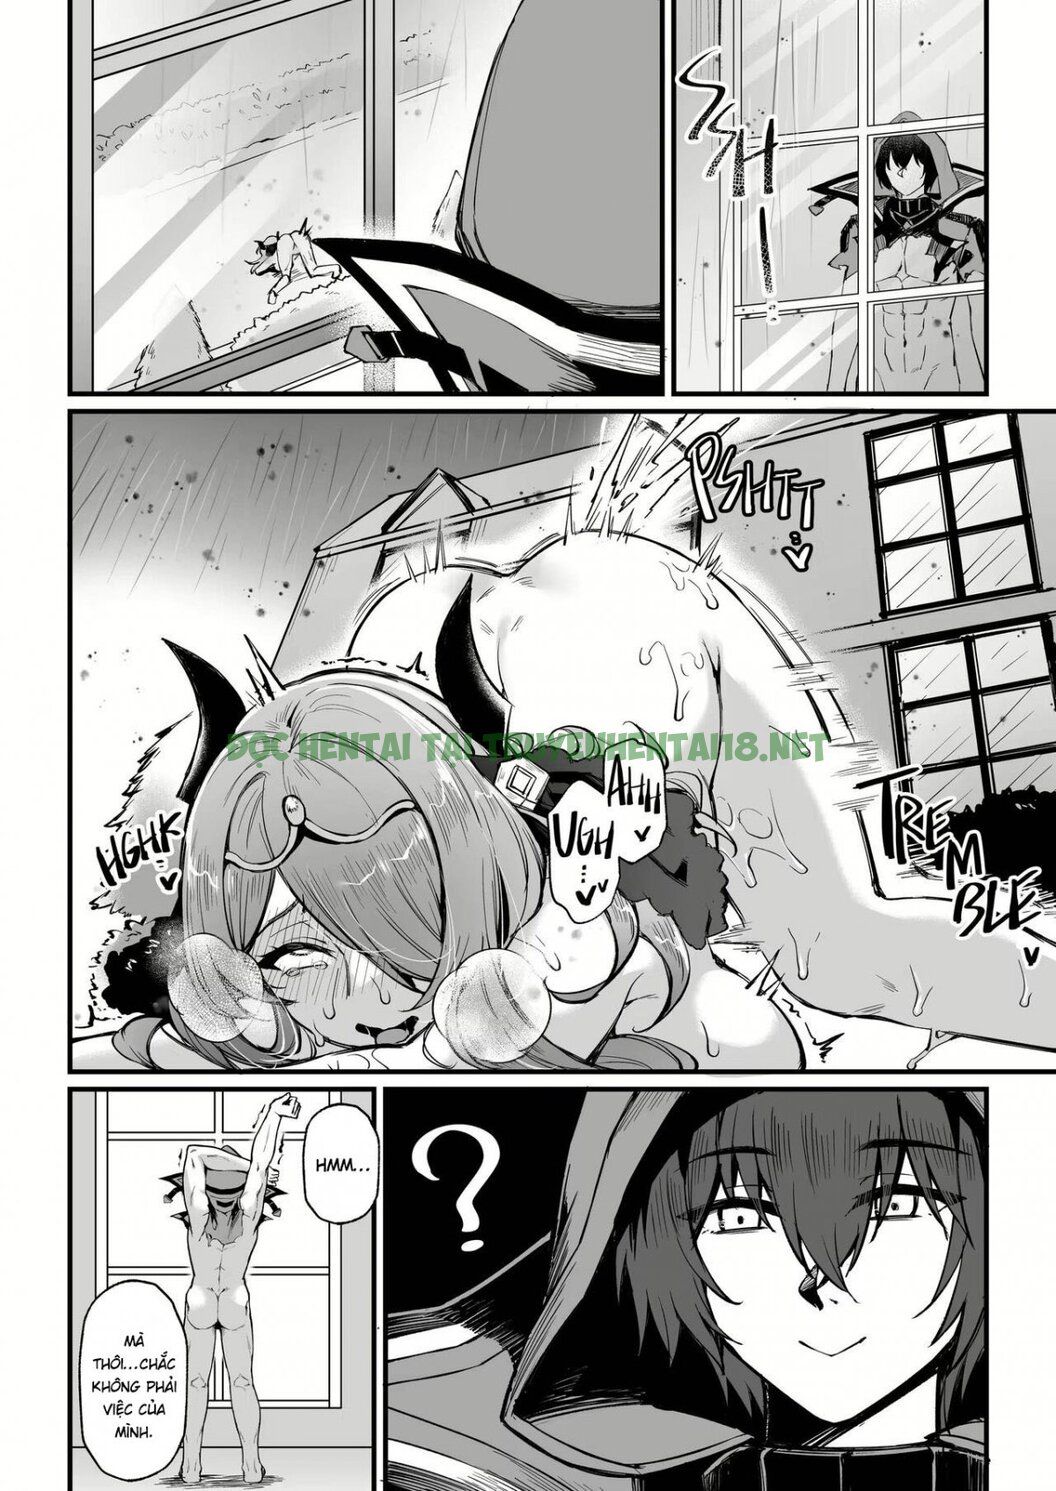 Xem ảnh I NEED MORE POWER! - Chapter 1.5 END - 20 - Hentai24h.Tv